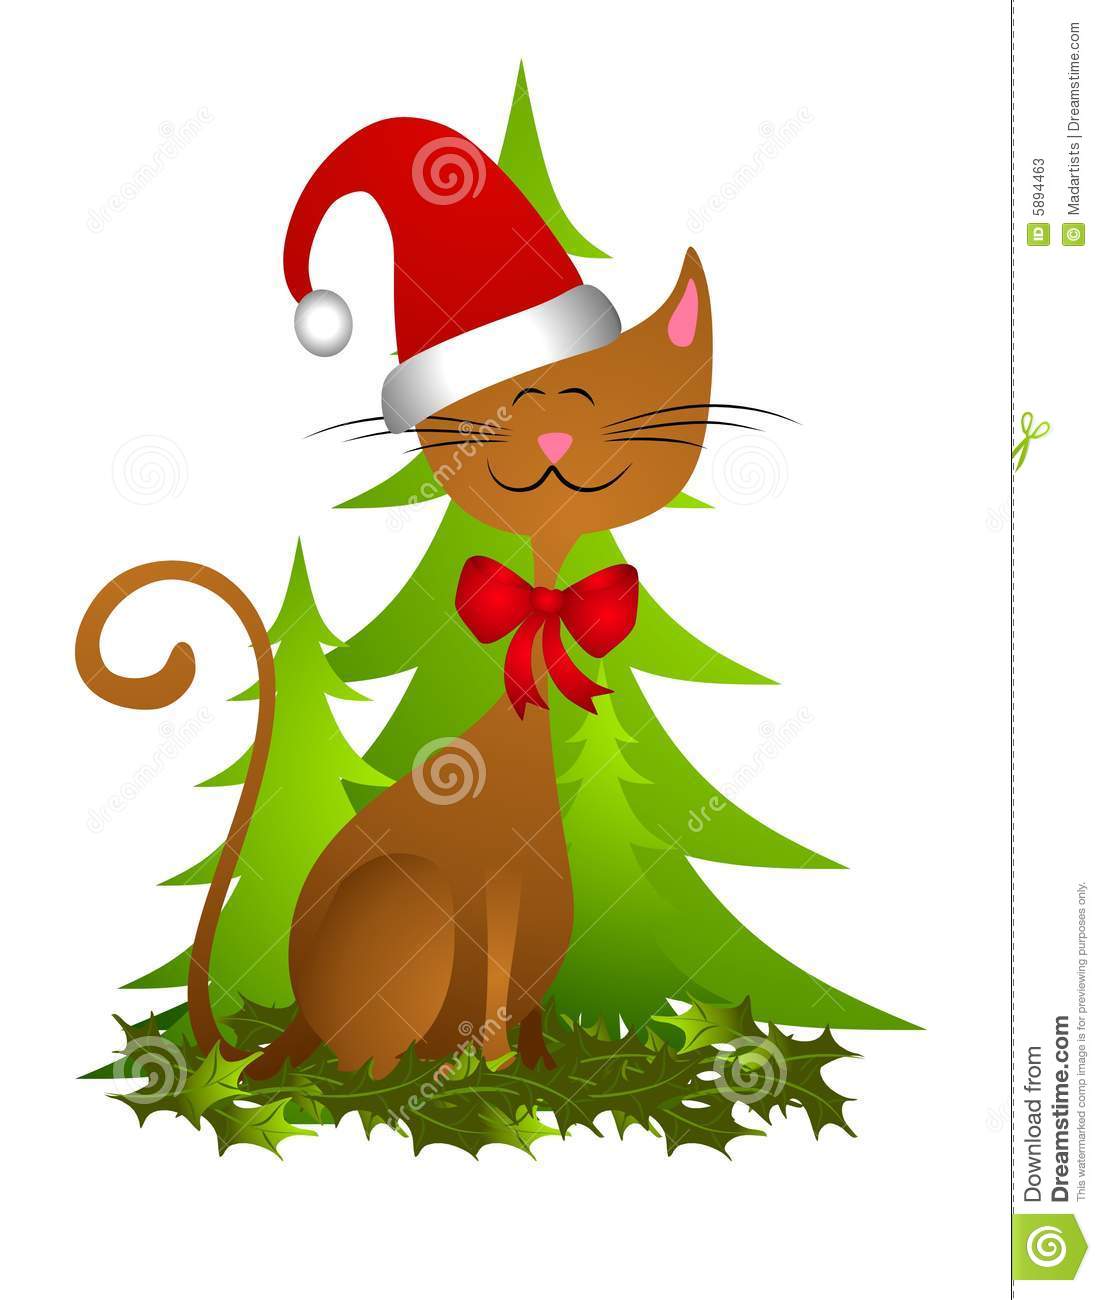 Clip Art Illustration Featuring A Cute Cat Wearing Santa Hat With Bow